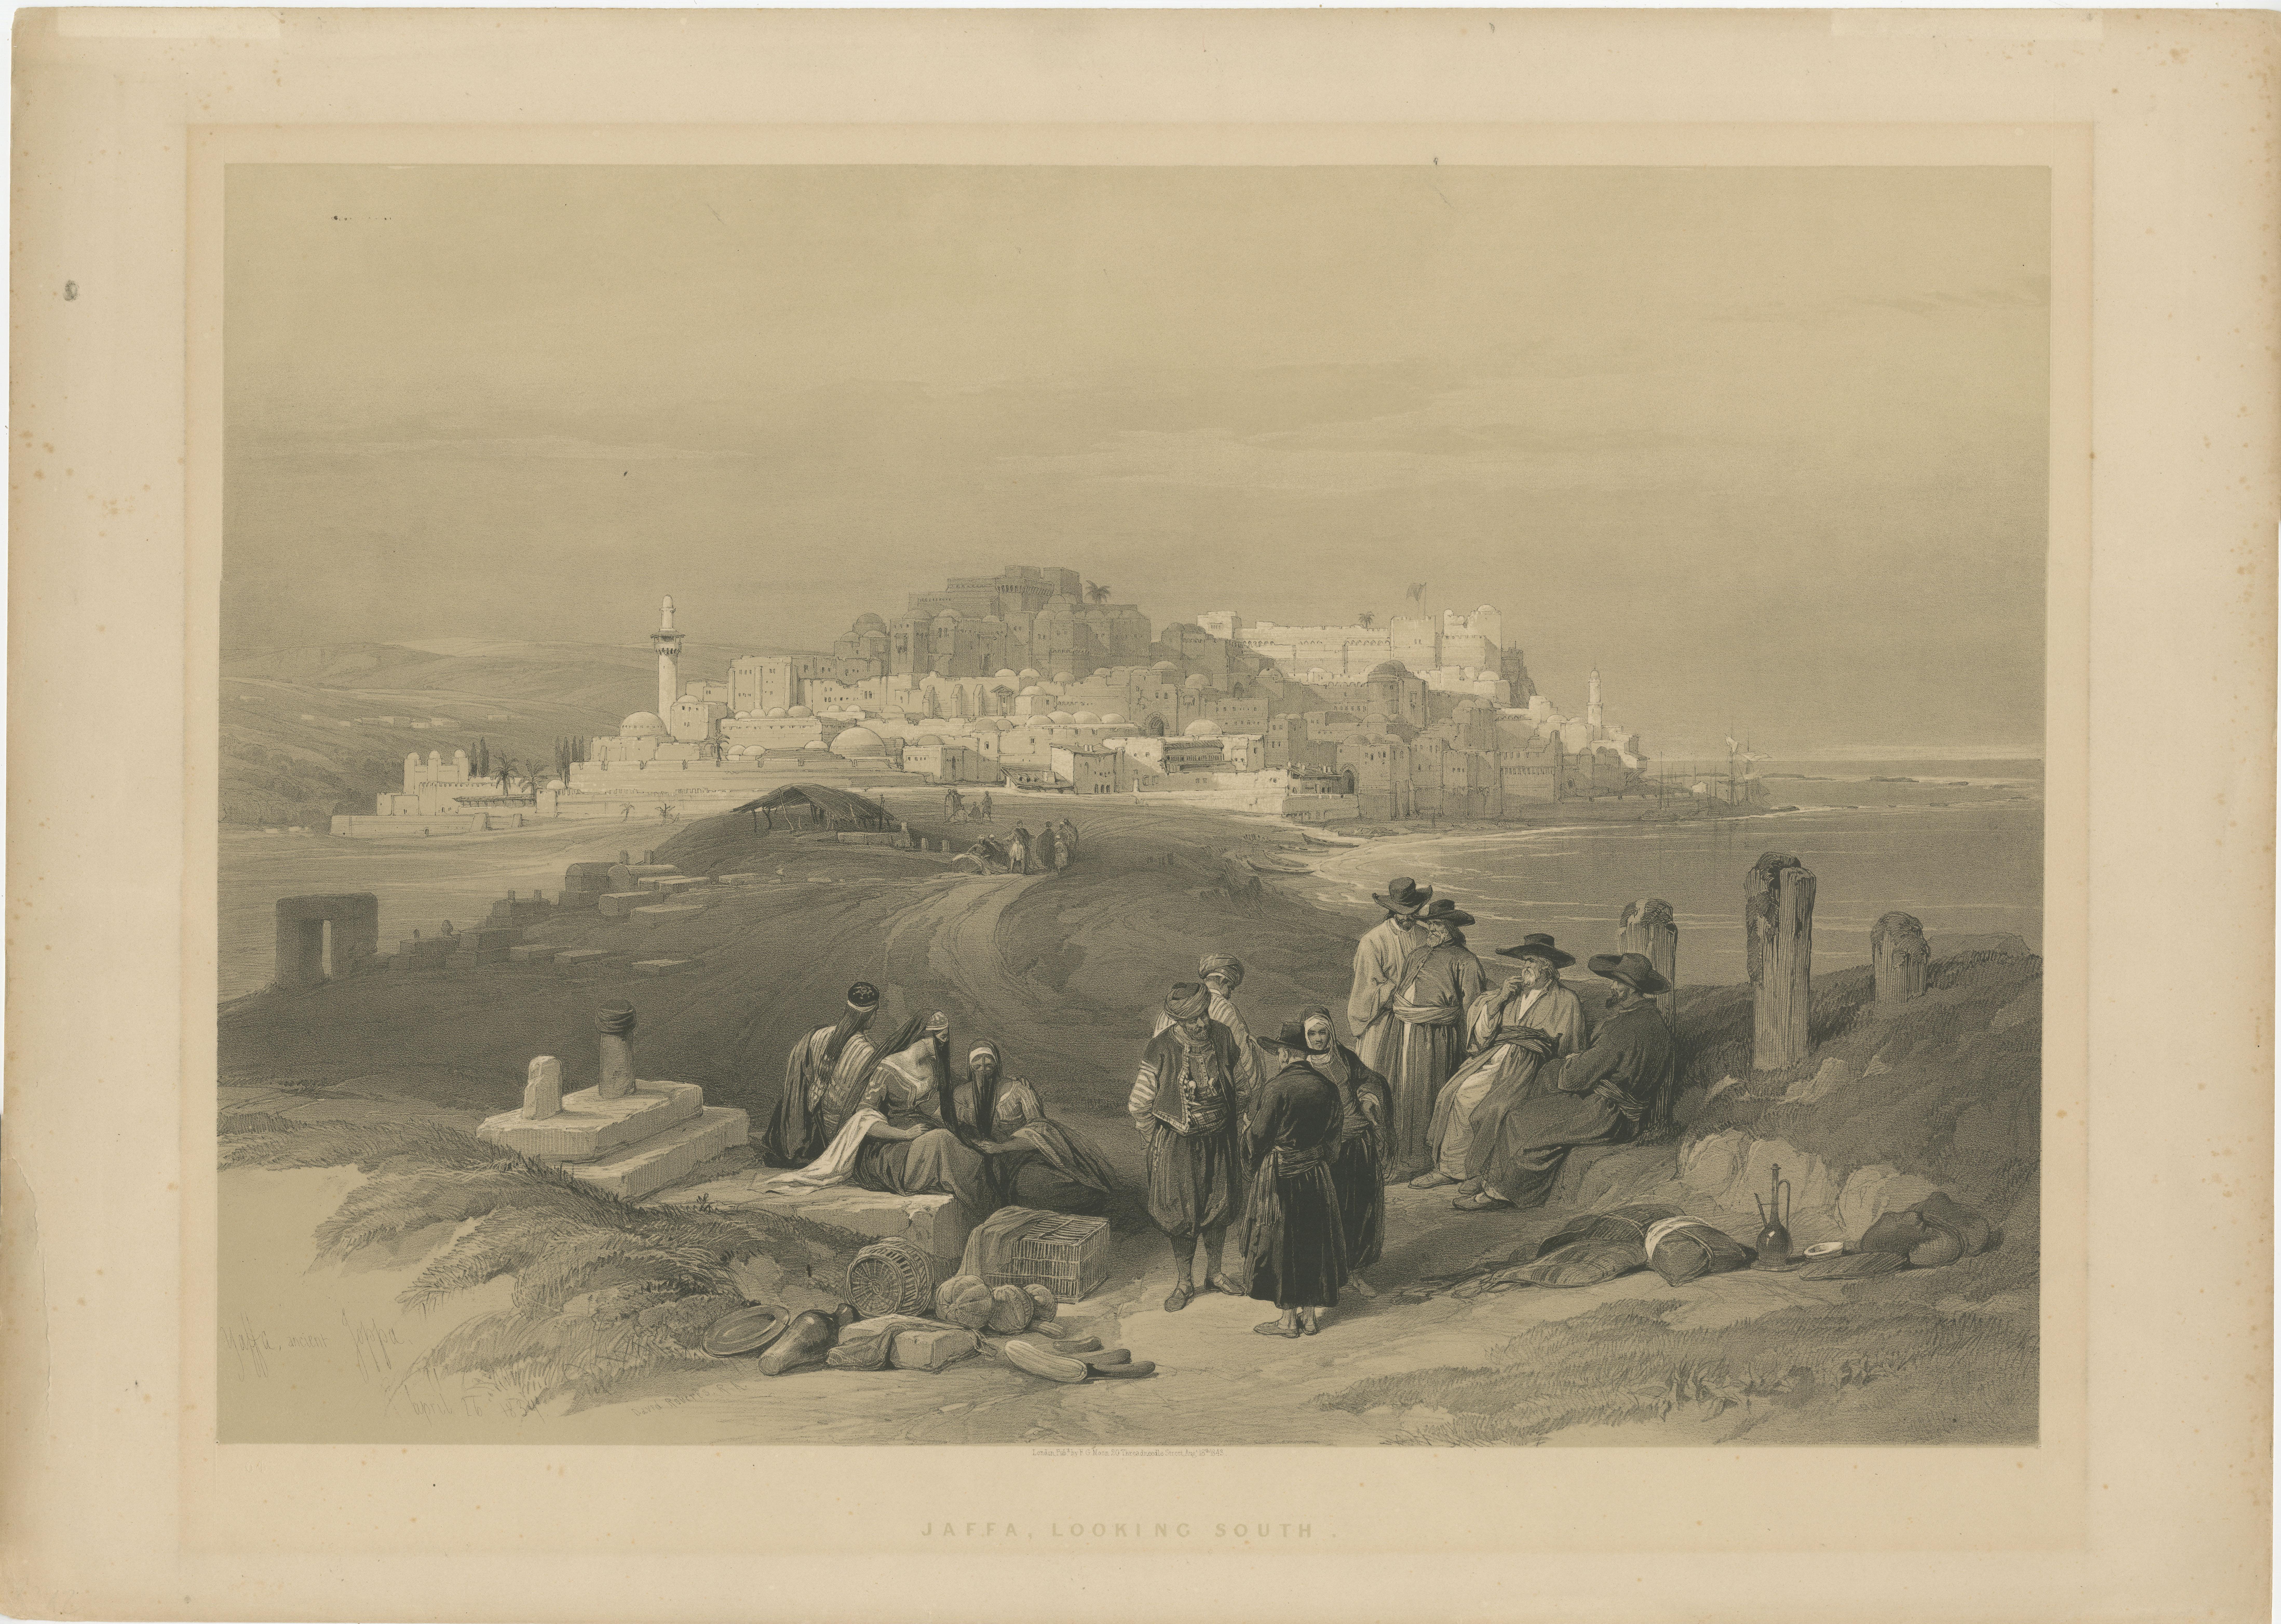 Antique print titled 'Jaffa, looking south'. Tinted lithograph of Jaffa. Jaffa, in Hebrew Yafo and in Arabic Yafa and also called Japho or Joppa, is an ancient Levantine port city founded by the Canaanites that is now part of southern Tel Aviv,